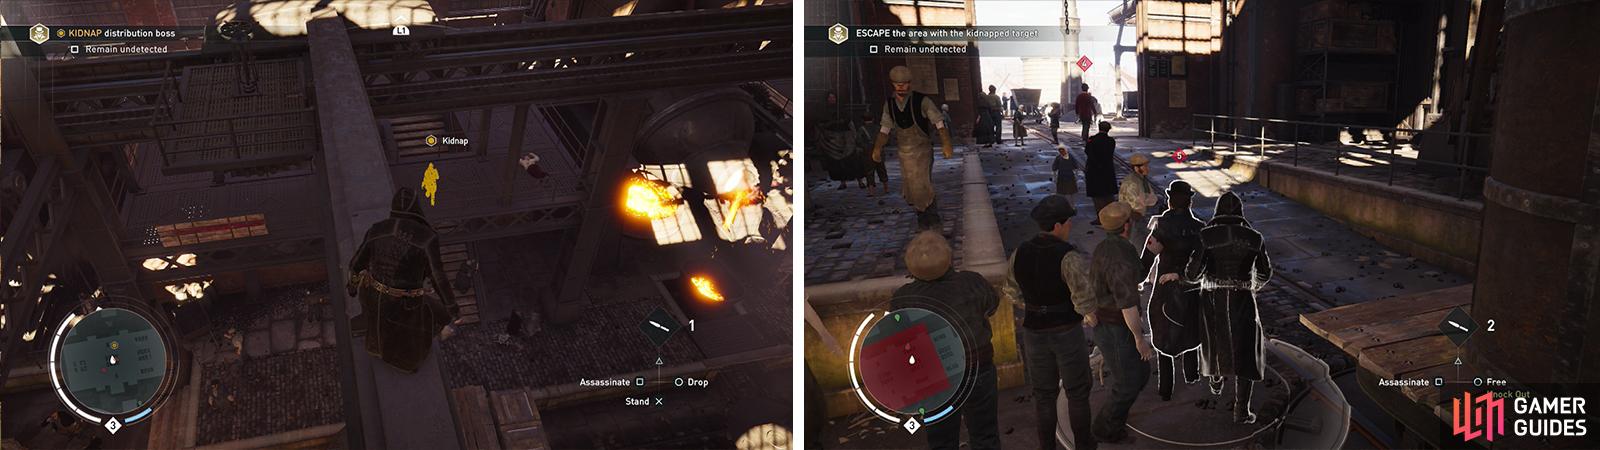 Use Eagle Vision to locate the target (left). Once you have kidnapped him, escort him out of the factory (right).